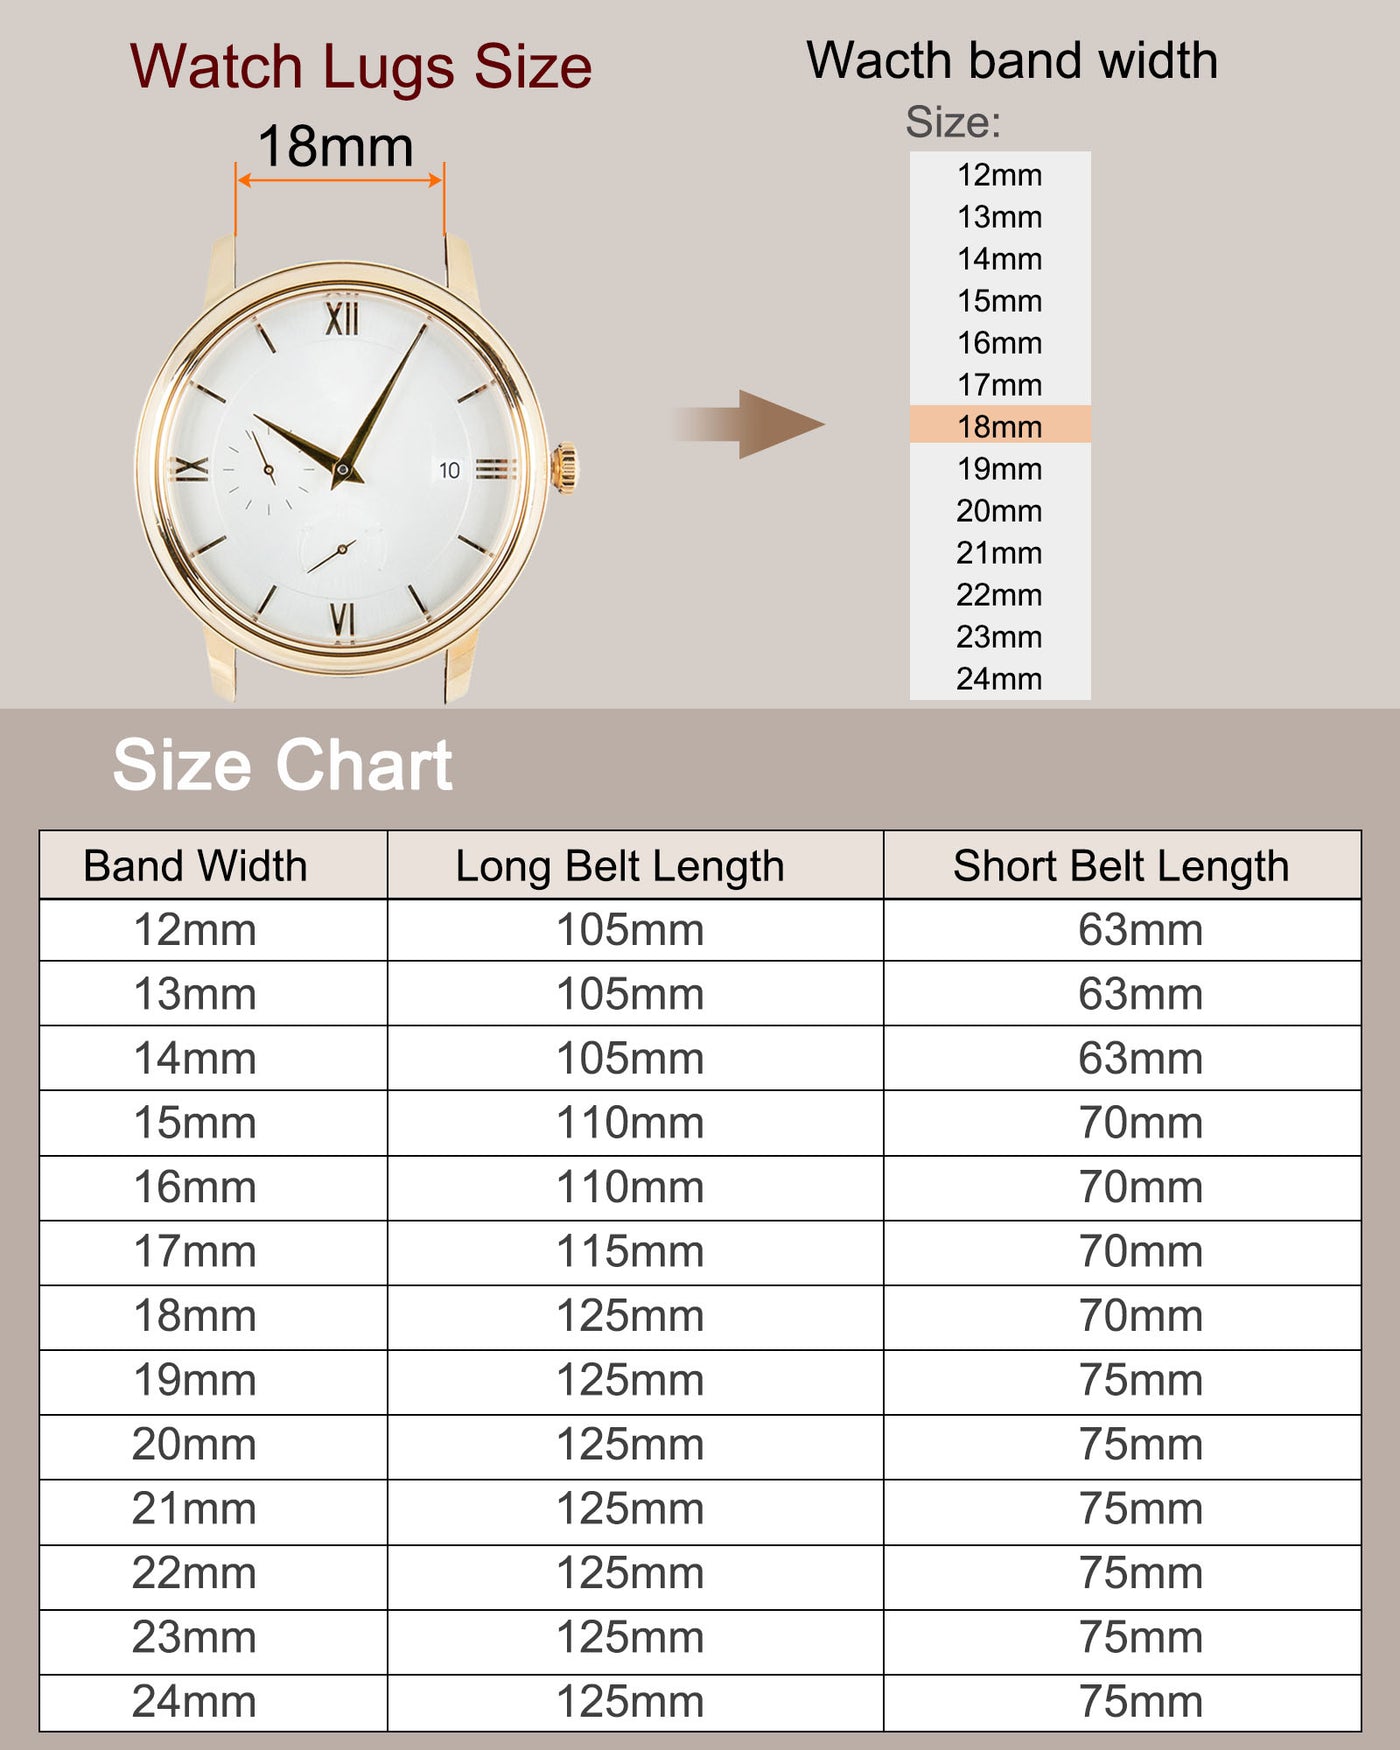 uxcell Uxcell Leather Band Deployment Buckle Watch Strap 23mm Leather Strap, Light Brown